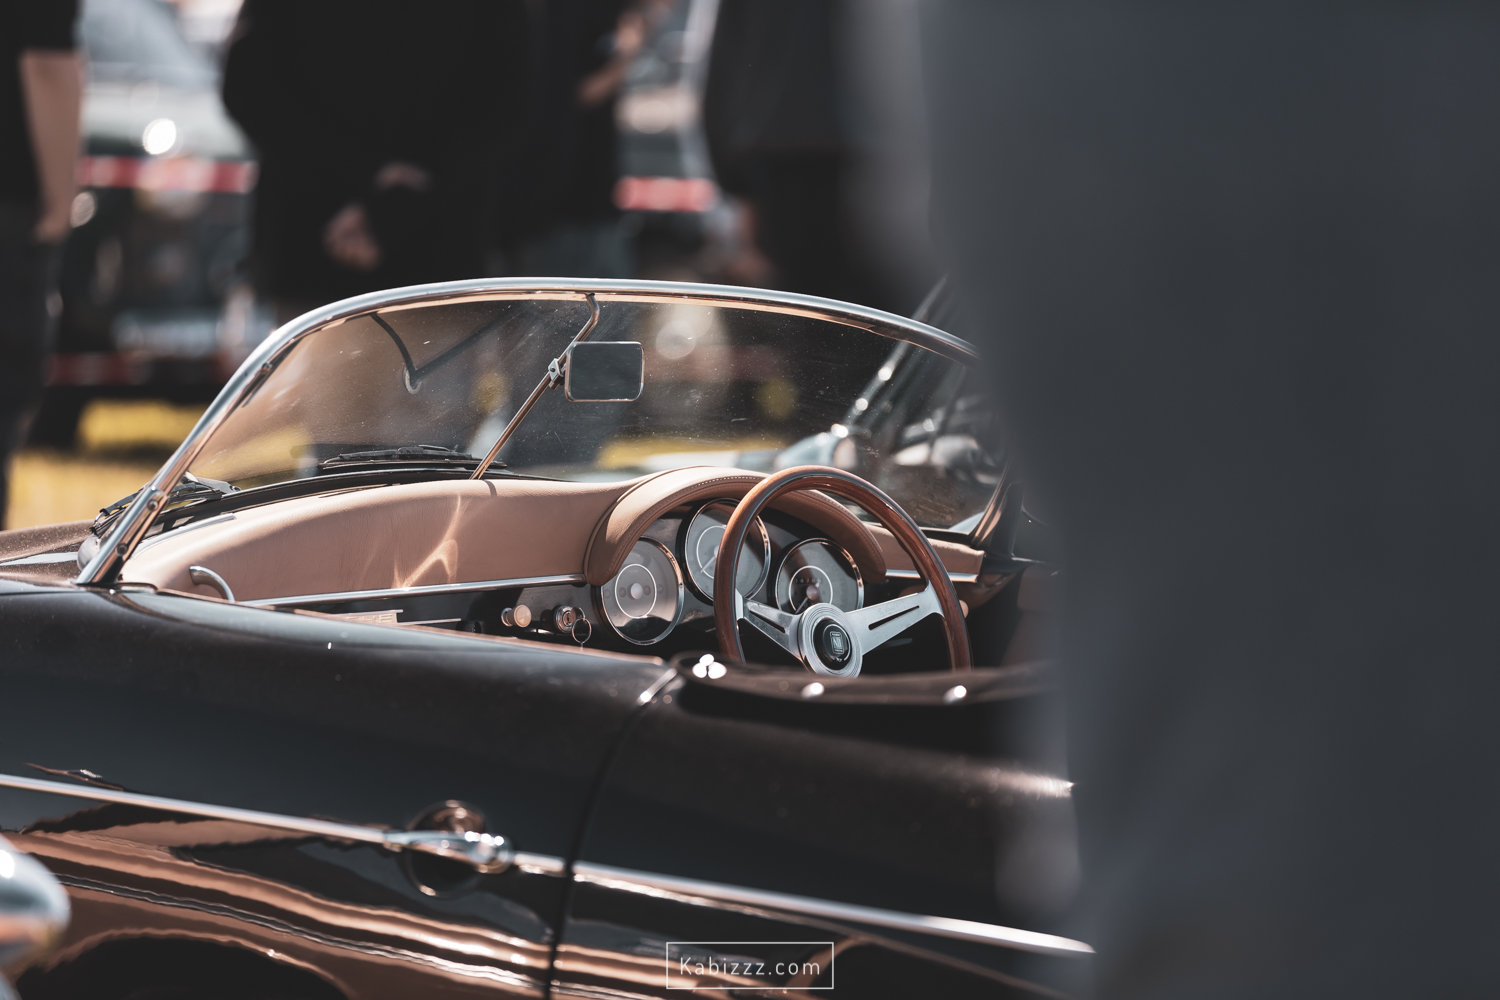 Kabizzz_Photography_Stirling_District_Classic _cars-35.jpg